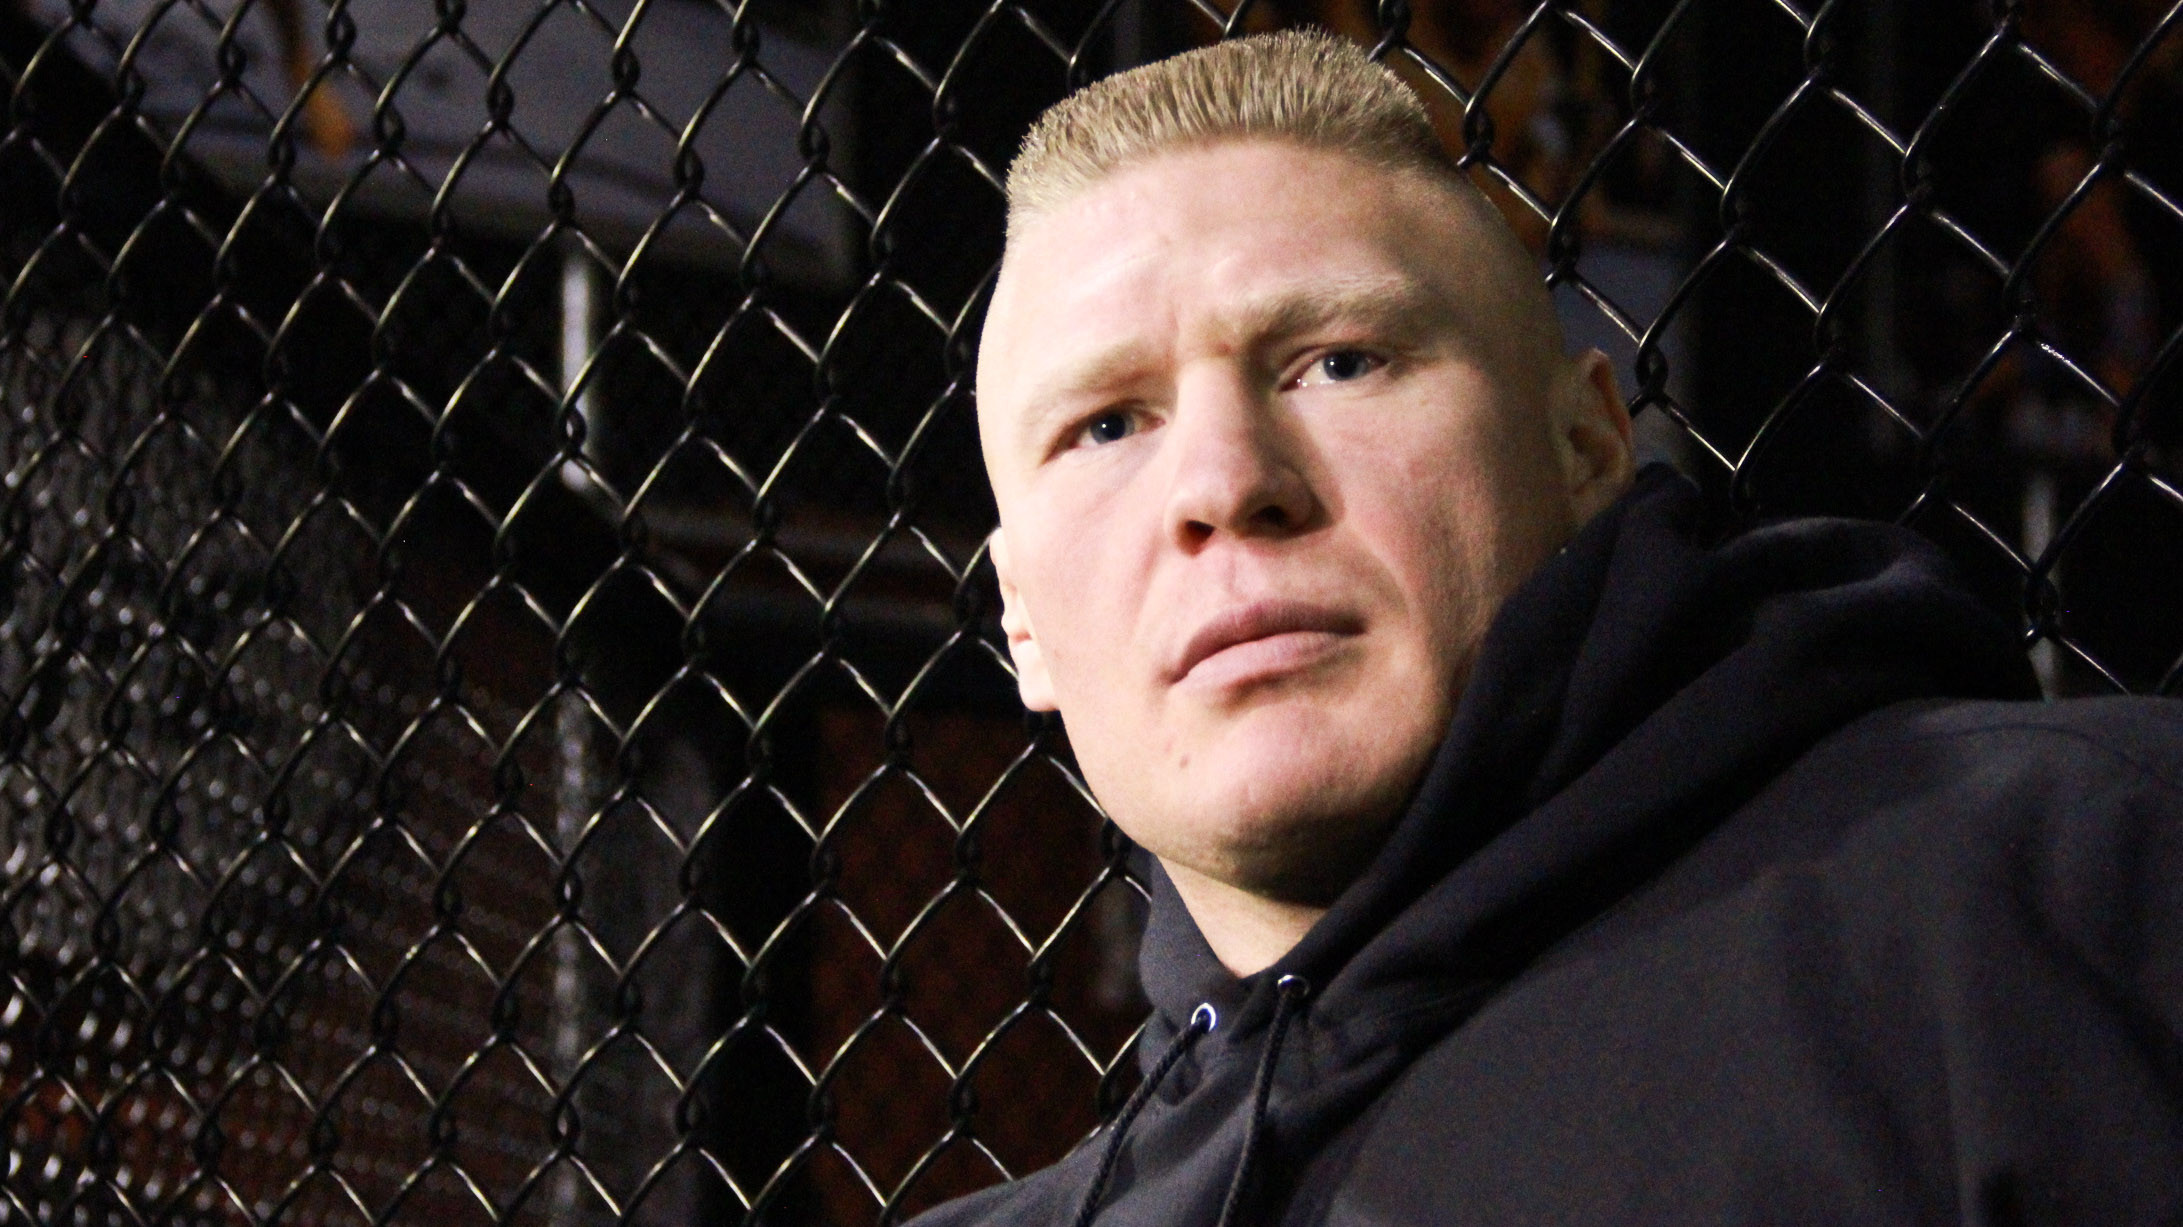 2183x1227 Brock Lesnar Proved The Doubters Wrong. “